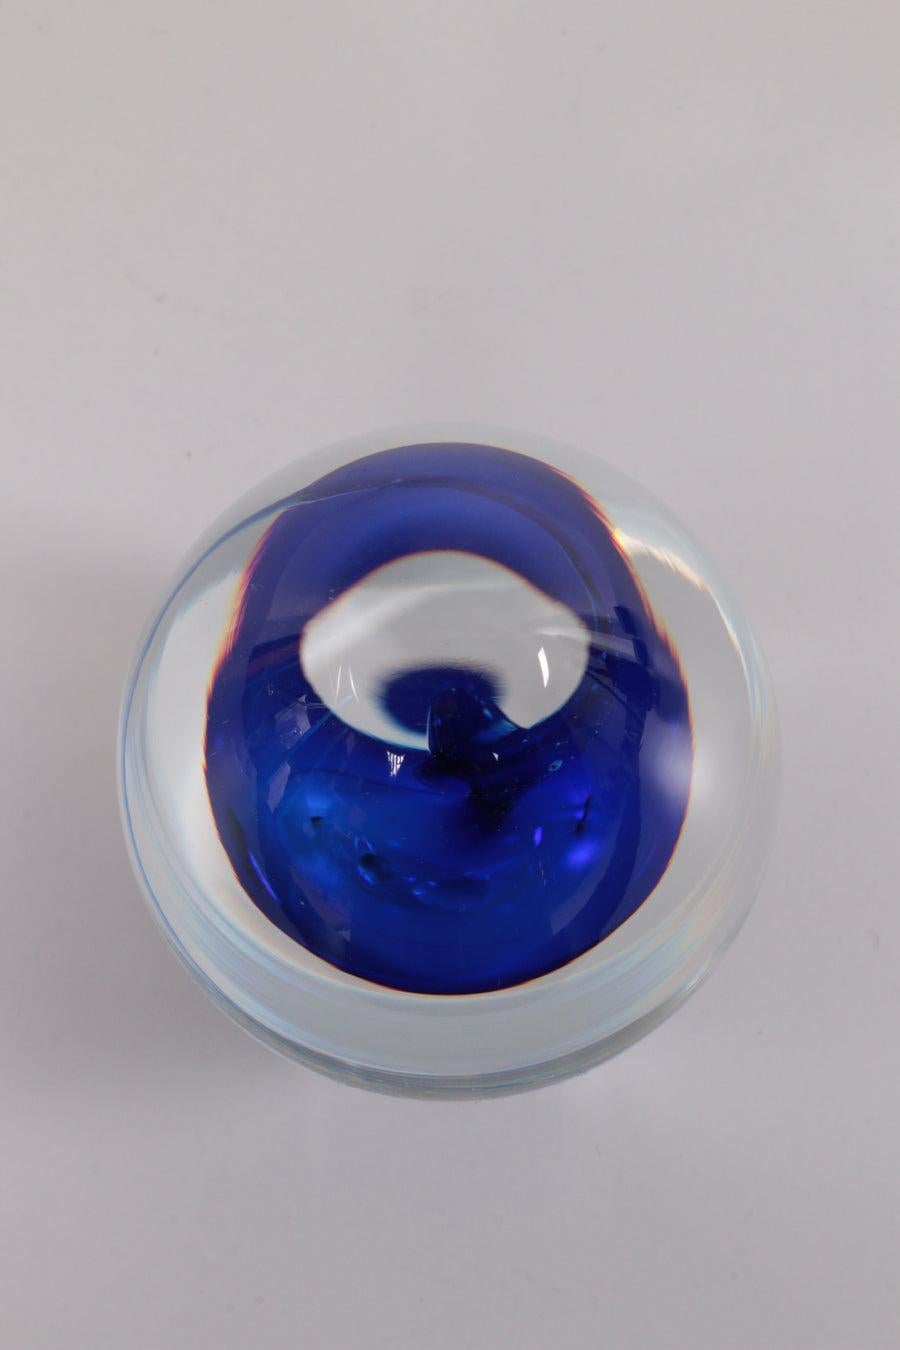 Paperweight Egg Shape with Blue Drop Artcristal Bohemia

Additional information: 
Dimensions: 7 W x 7 D x 9 H cm 
Period of Time: 1960
Country of origin: Czech Republic
Condition: Good
